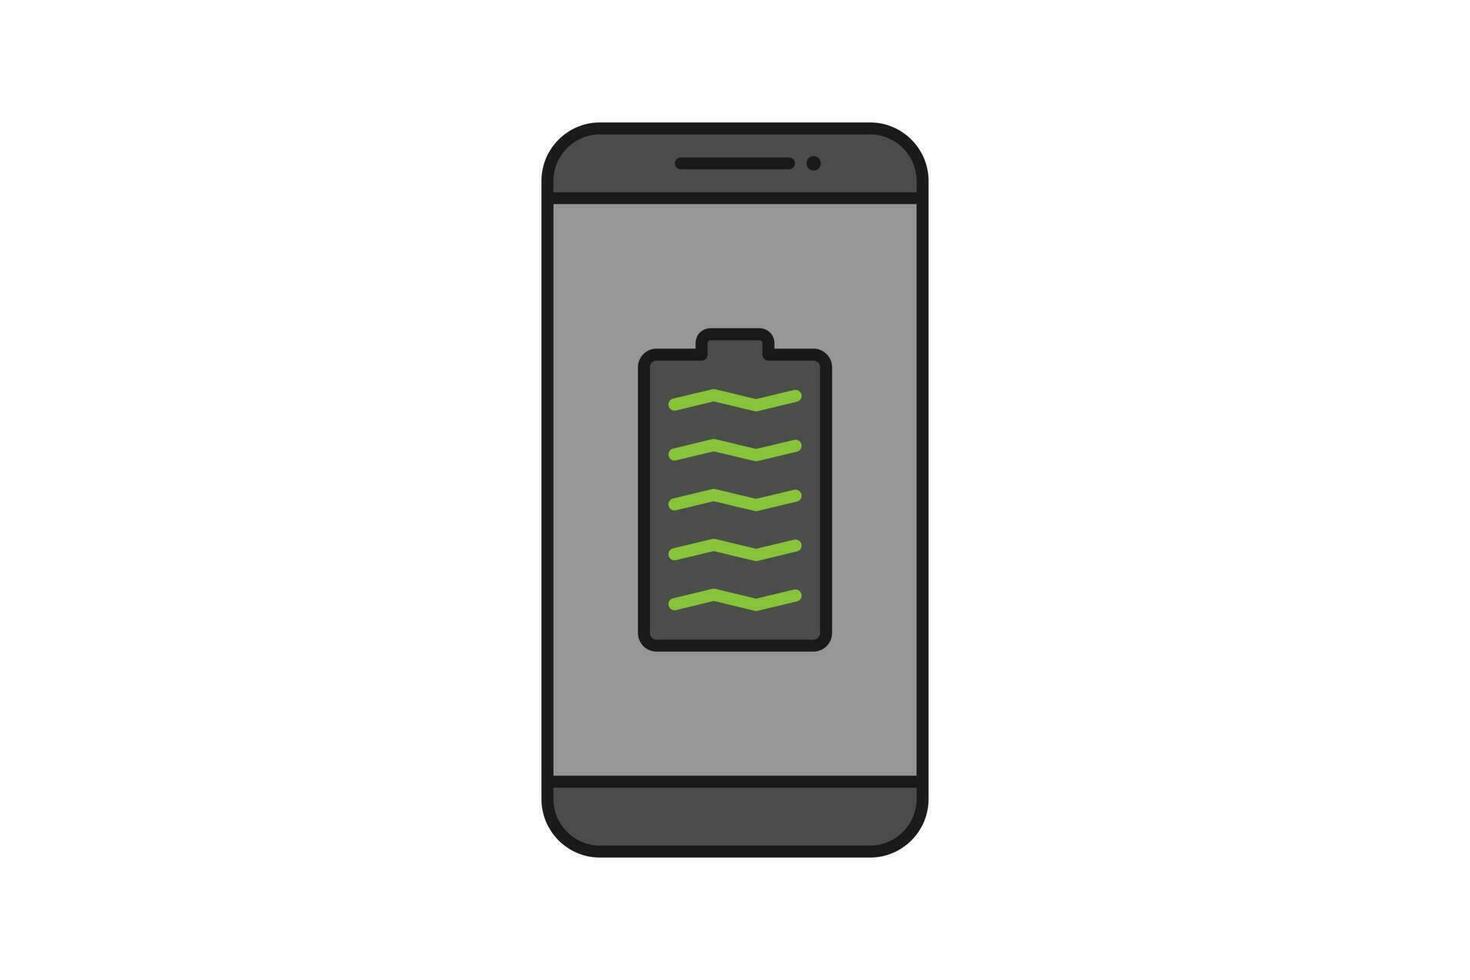 Smartphone battery notification vector icon sign symbol, smartphone and battery full